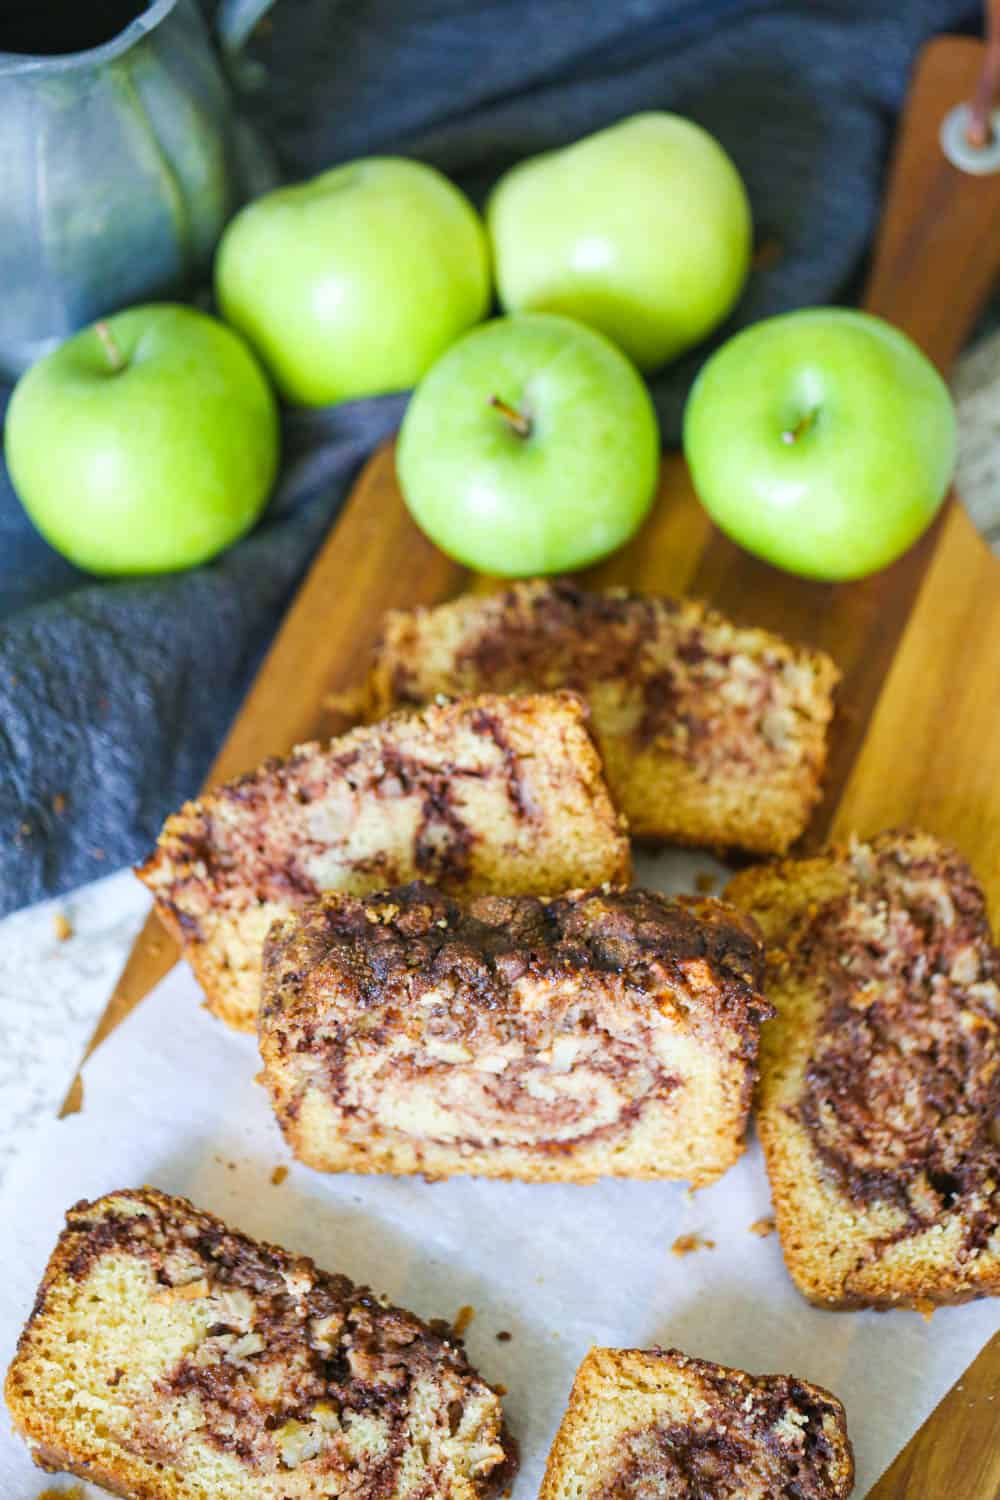 slices of cinnamon bread with apples